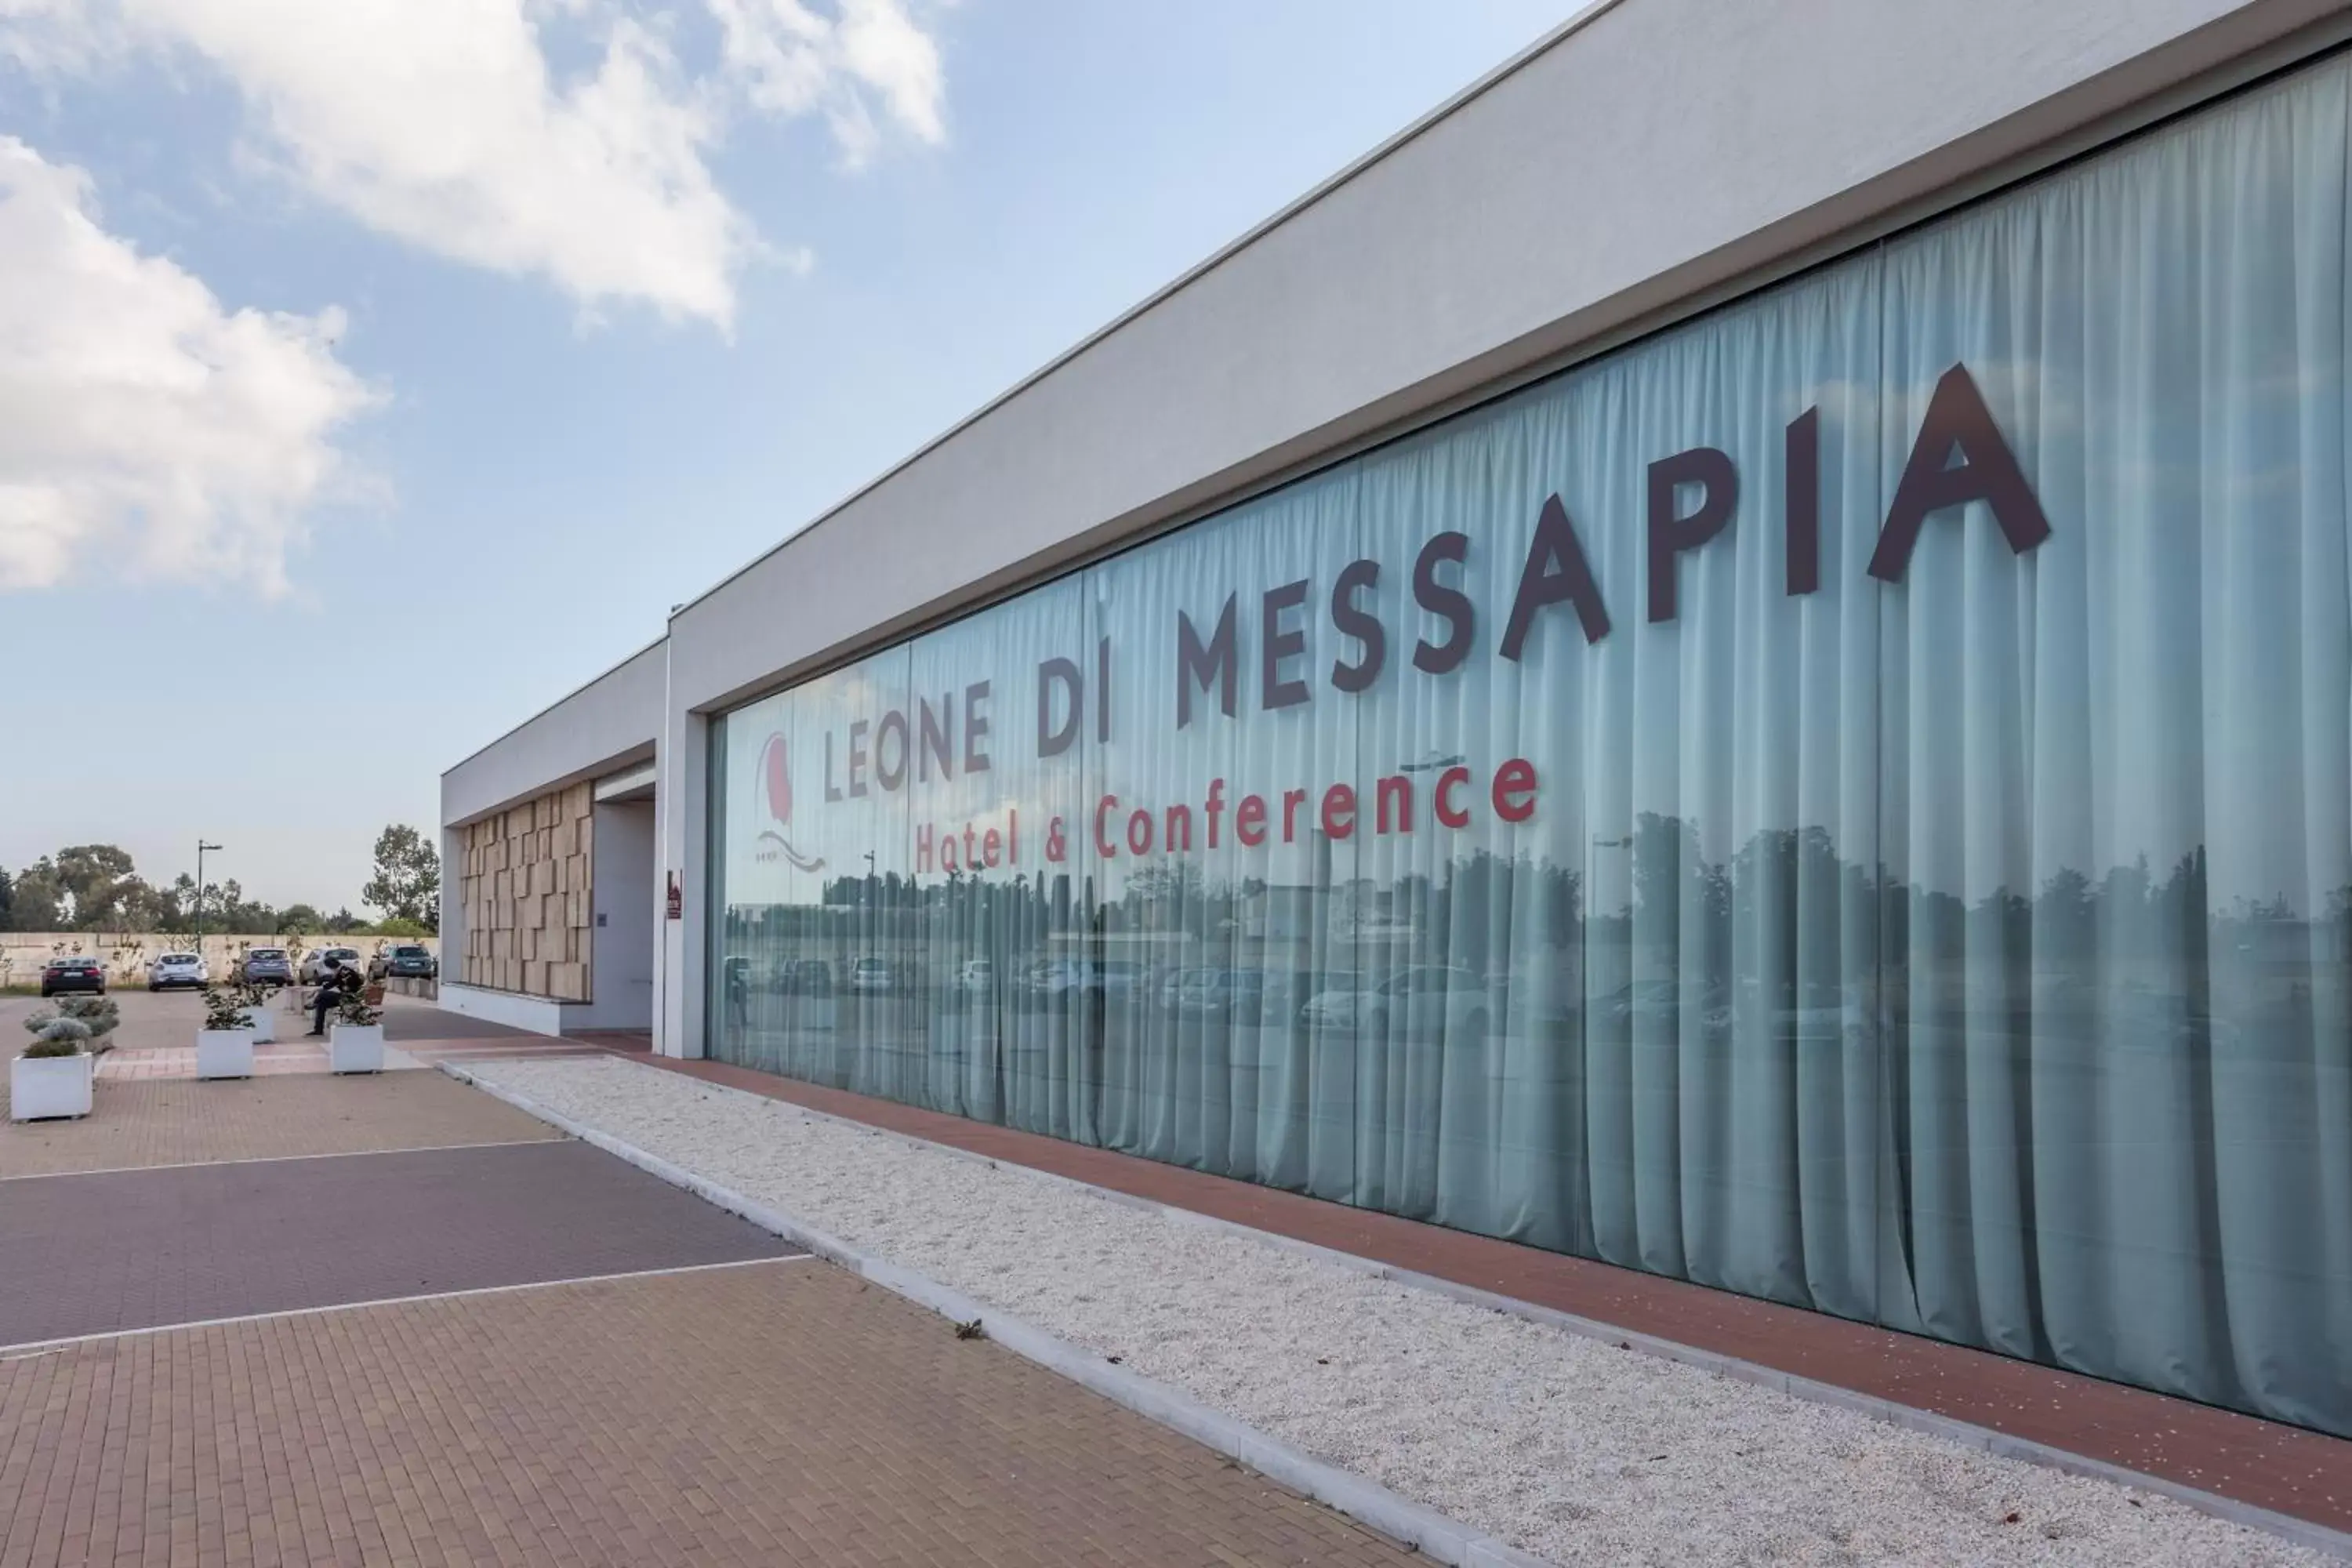 Facade/entrance, Property Logo/Sign in Best Western Plus Leone di Messapia Hotel & Conference